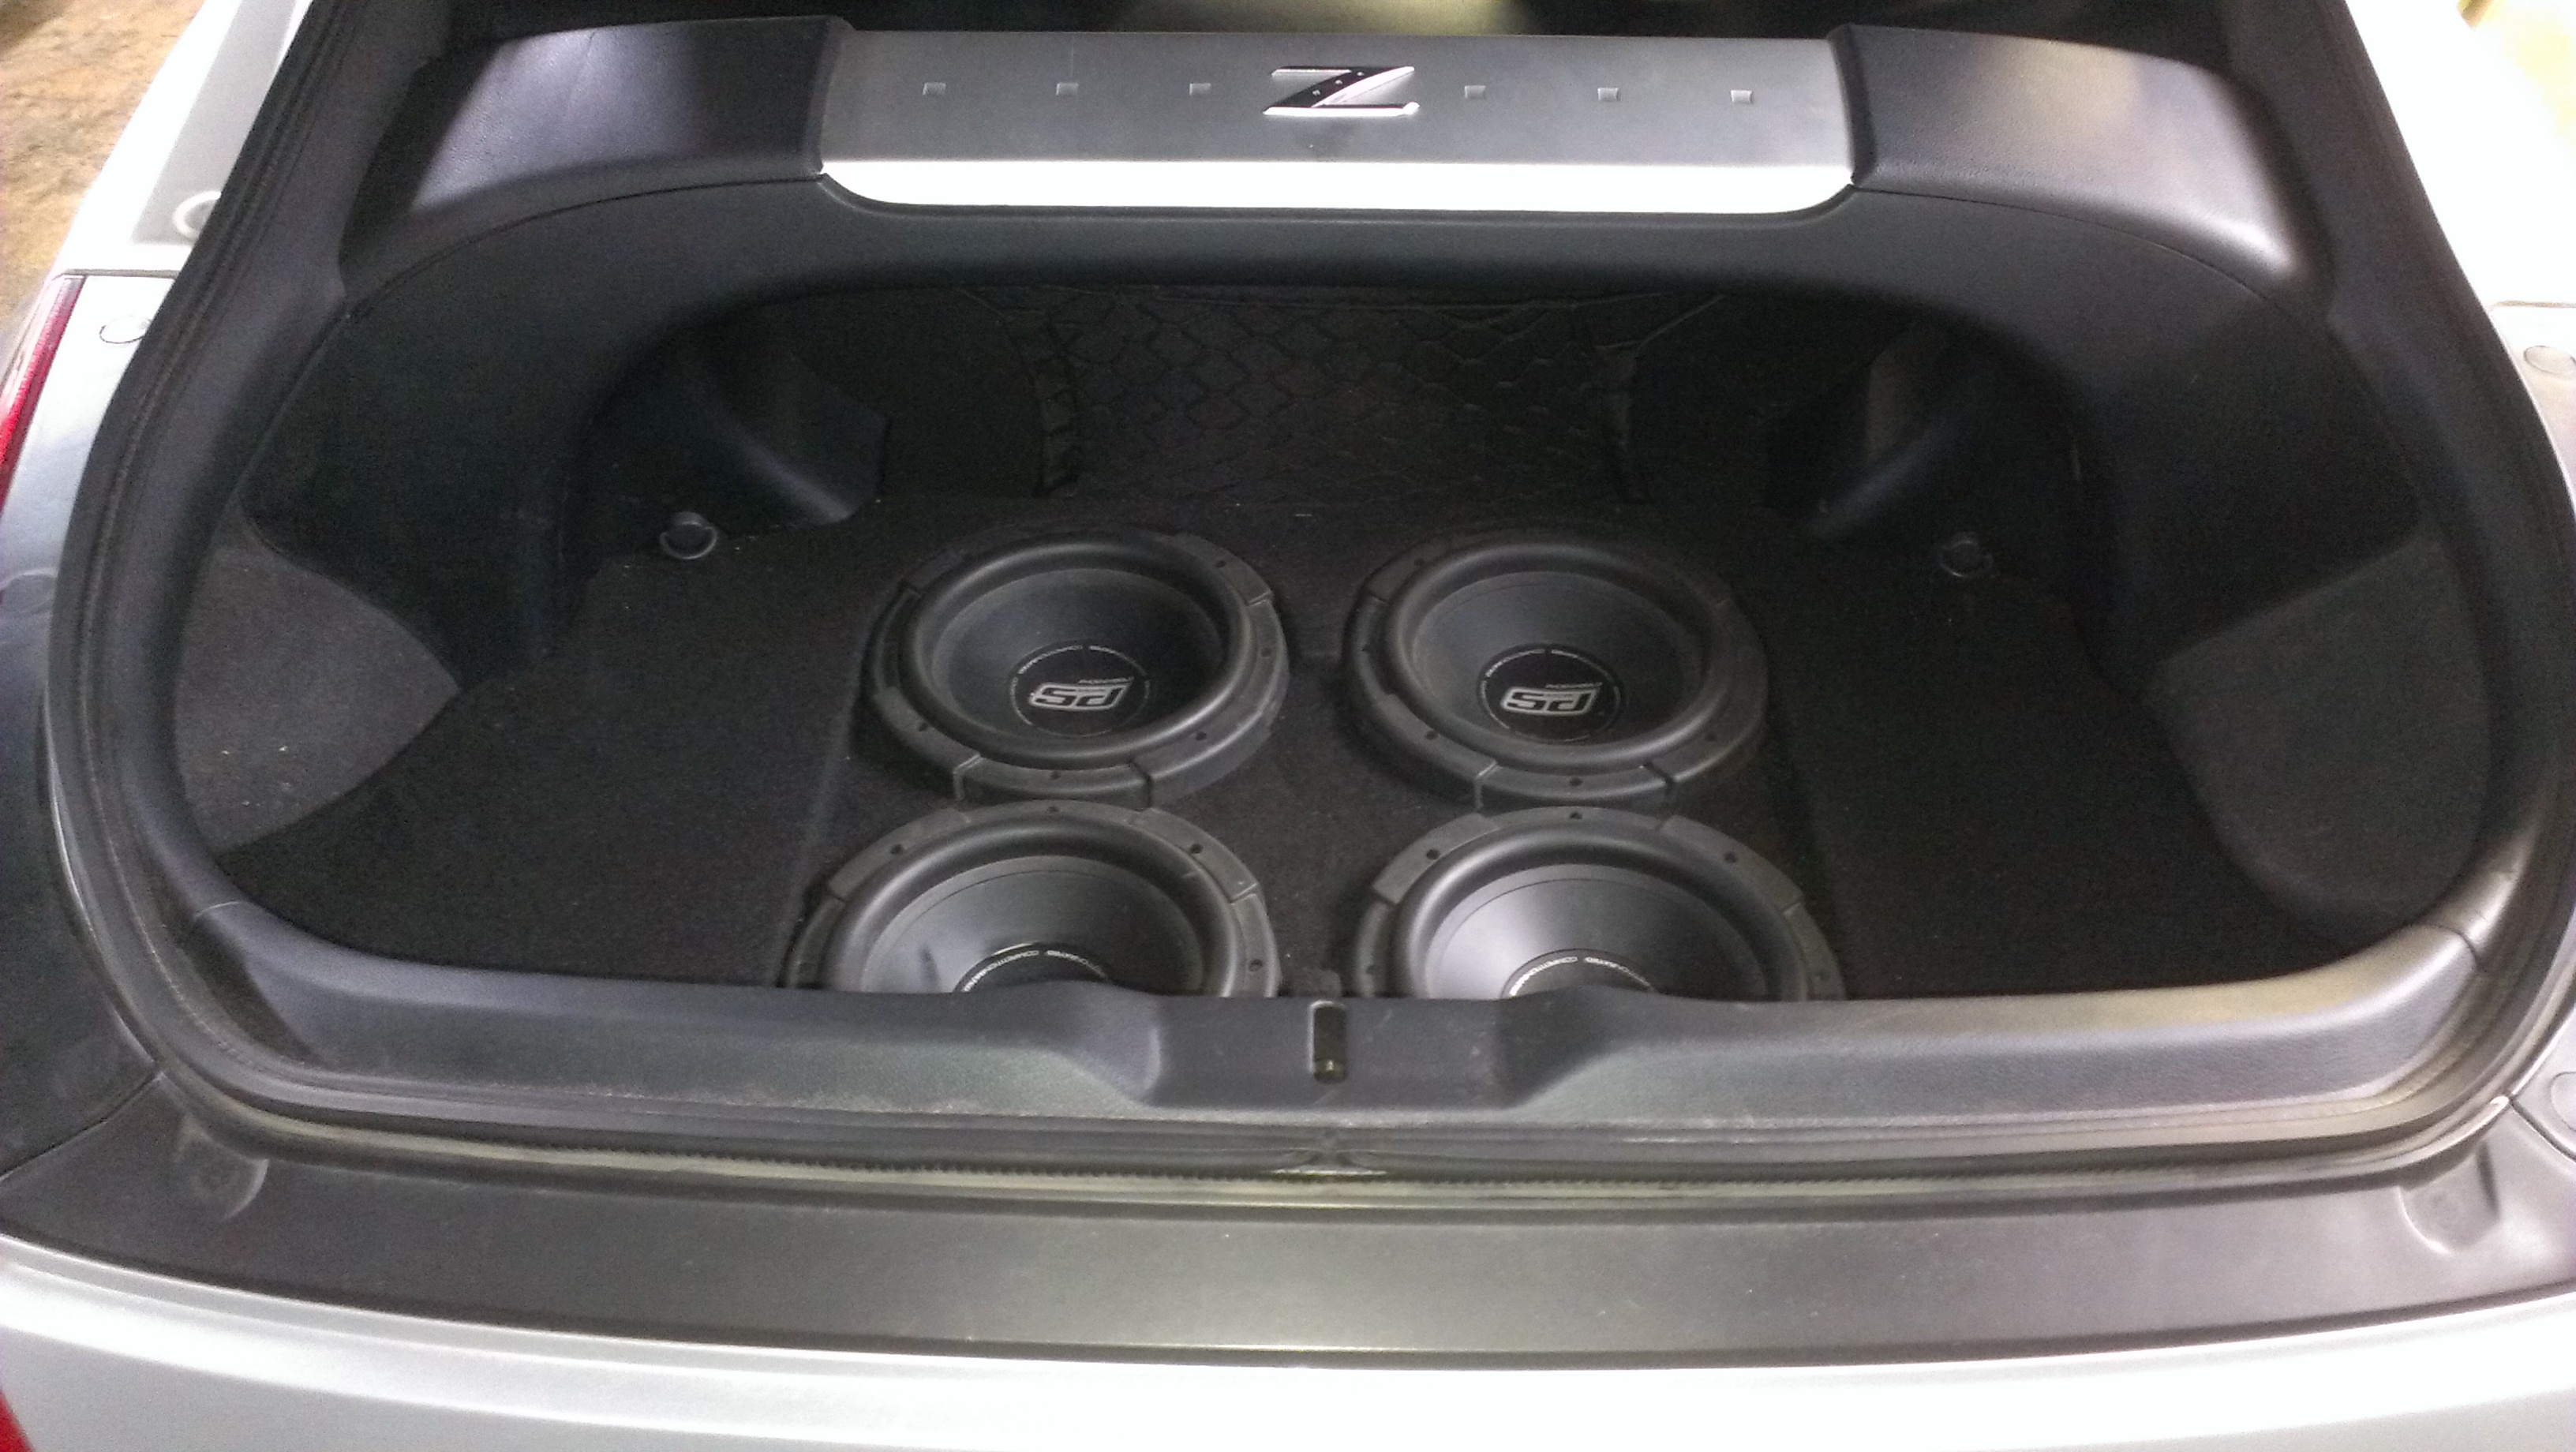 subwoofer placement - MY350Z.COM - Nissan 350Z and 370Z Forum Discussion.